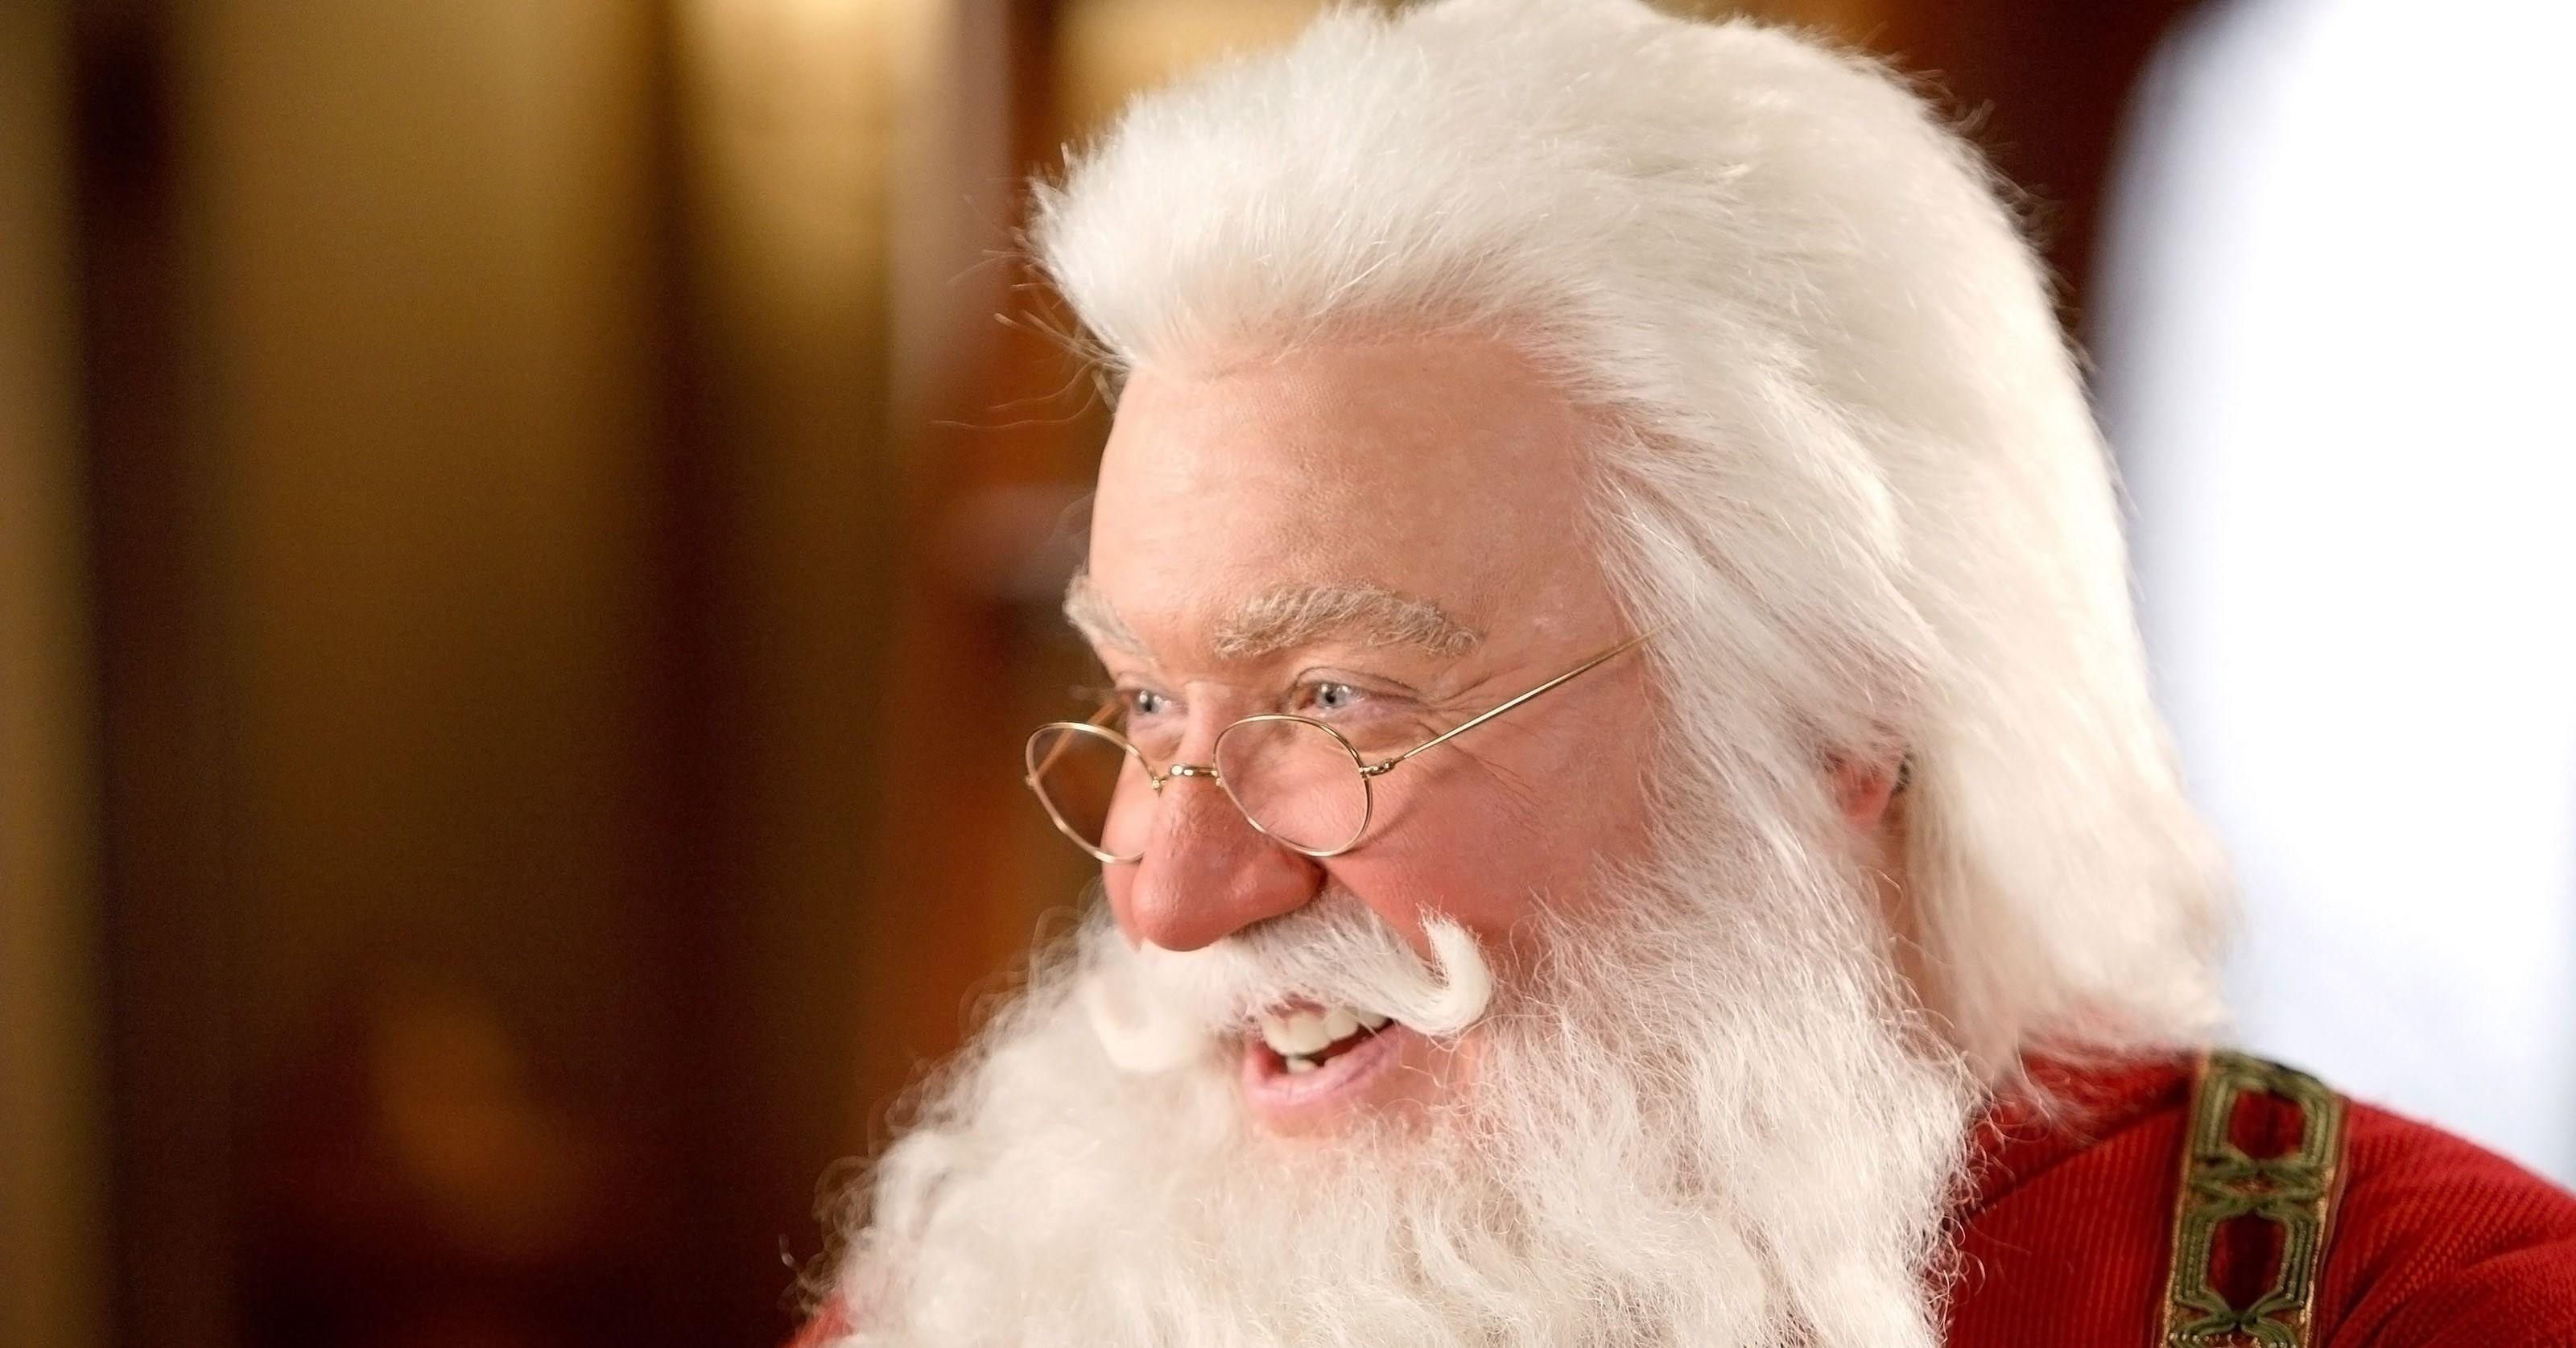 The Santa Clause 3 Bloopers, The Santa Clause 3: The Escape Clause